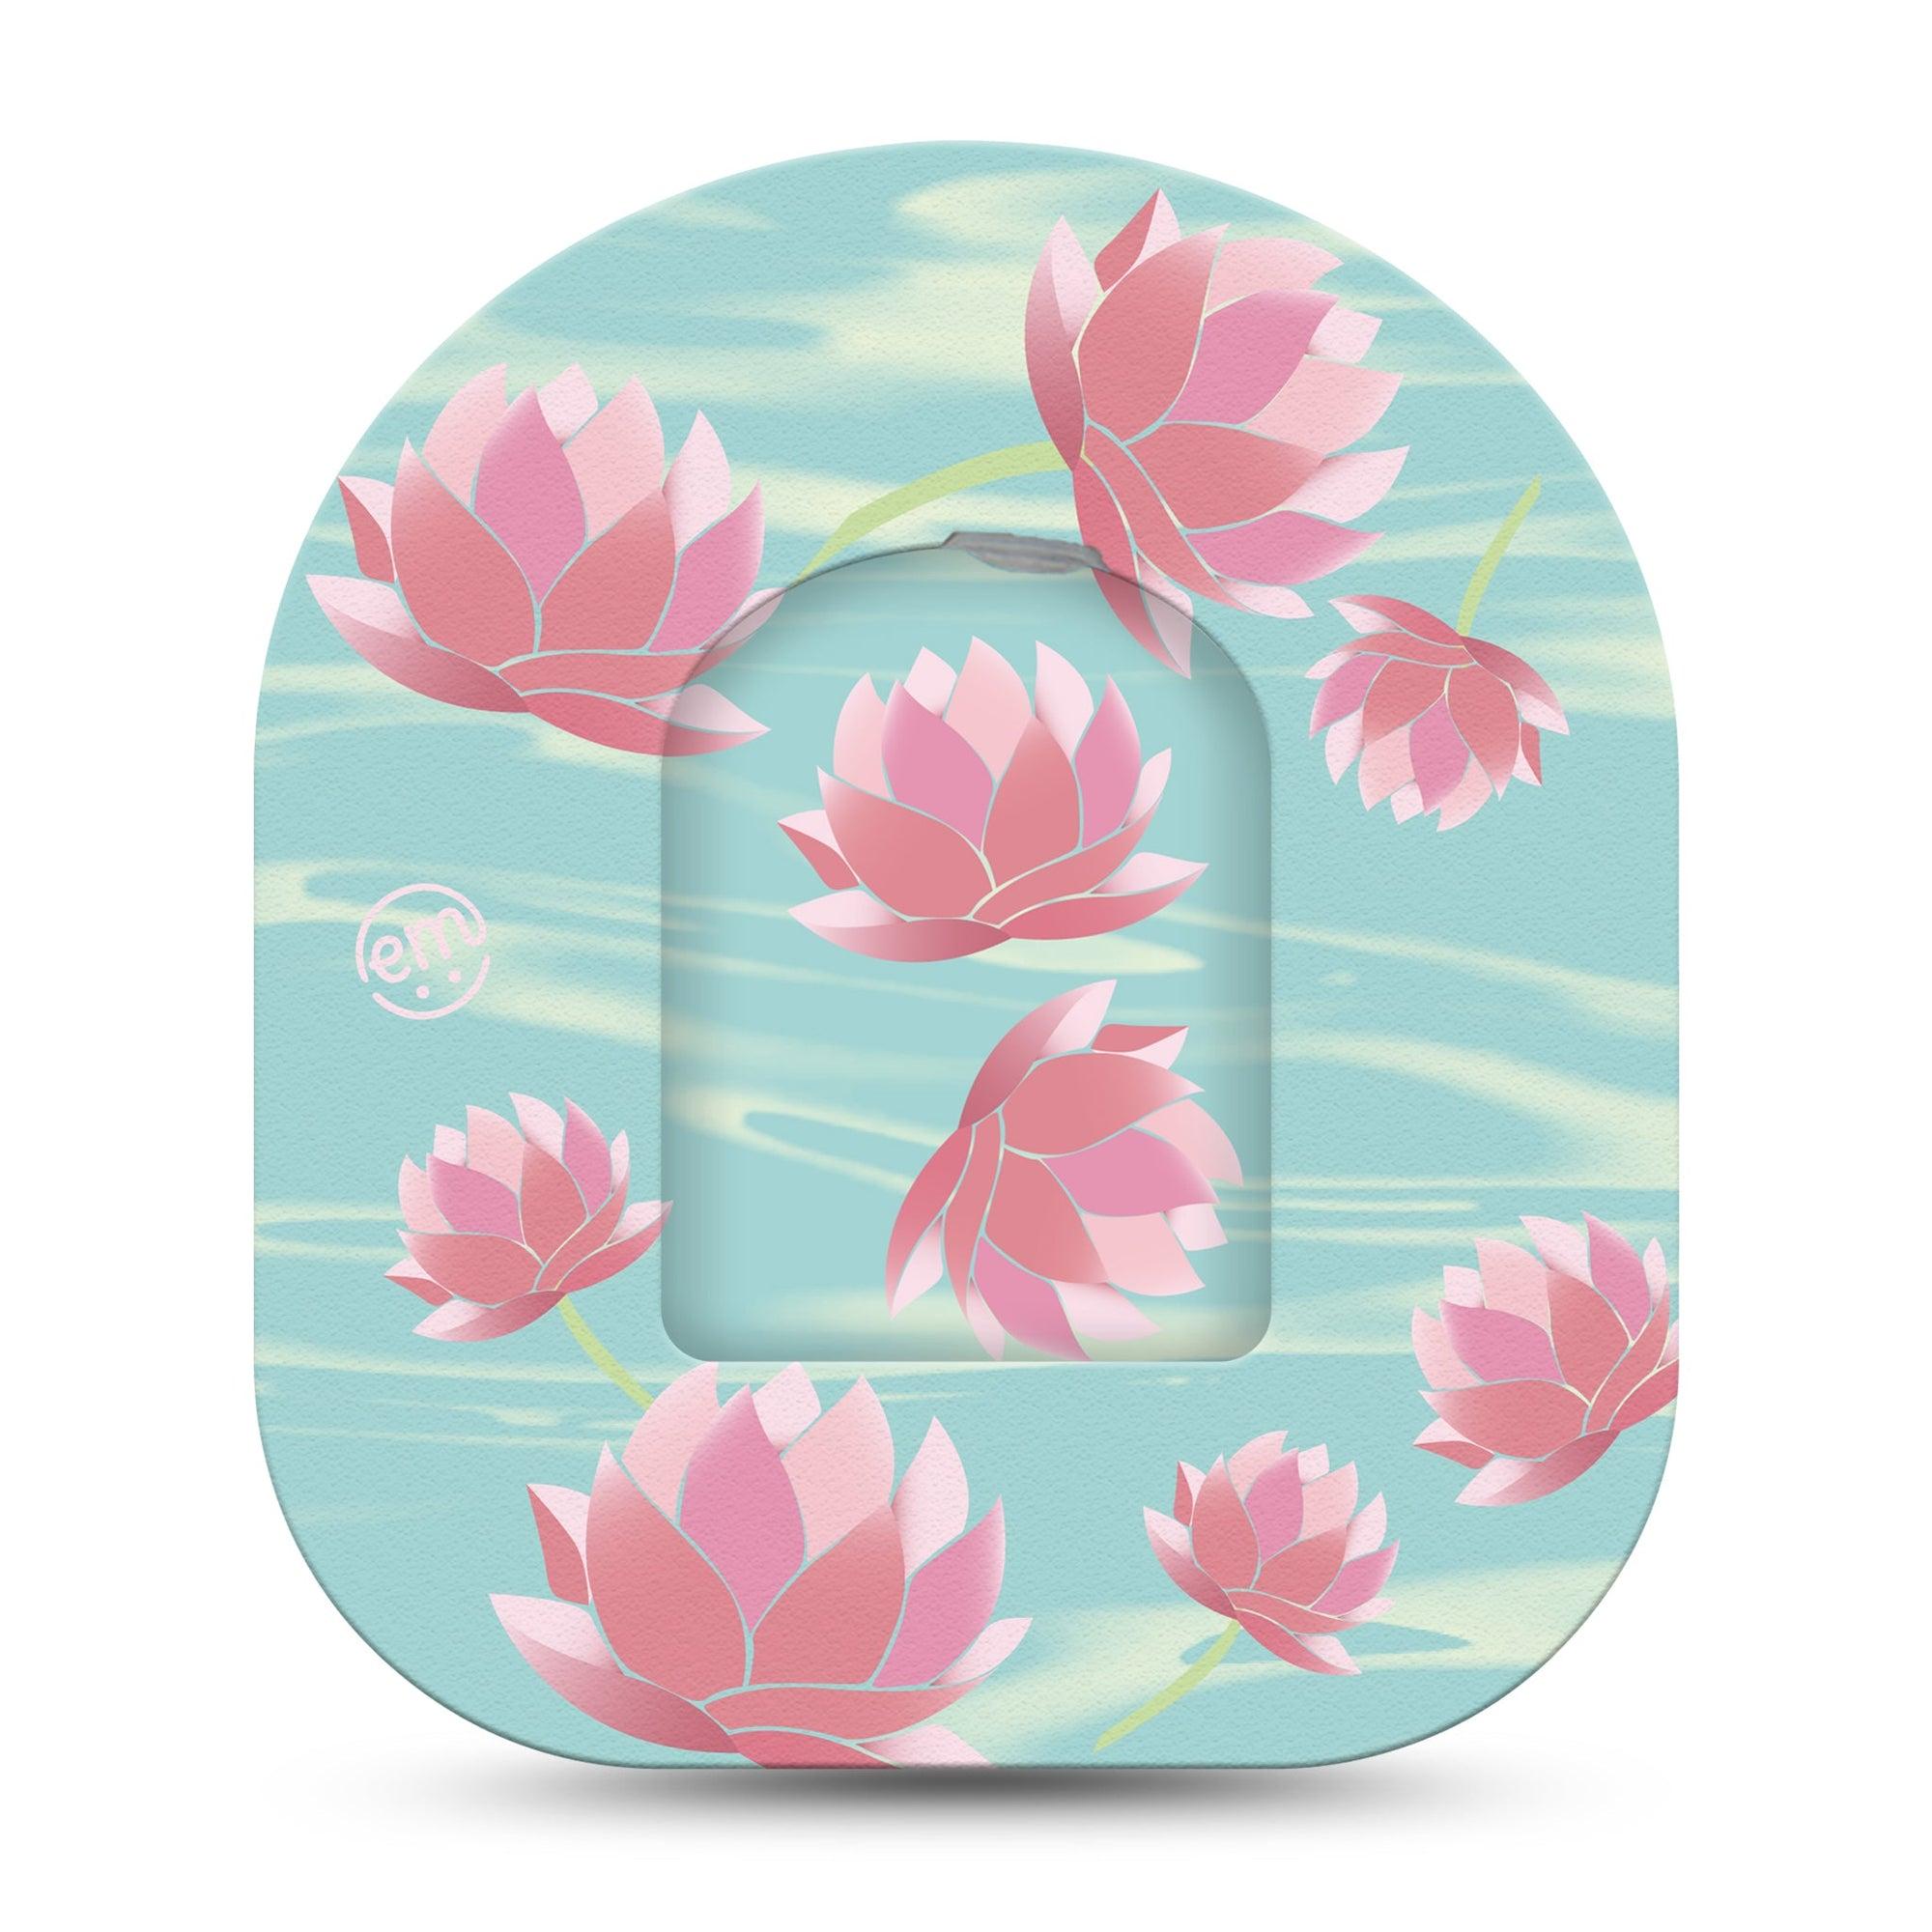 ExpressionMed Meditation Lotus Pod Full Wrap Sticker Single with Matching Omnipod Patch Sticker Pink Hibiscus Plants Decorative Decal Pump design